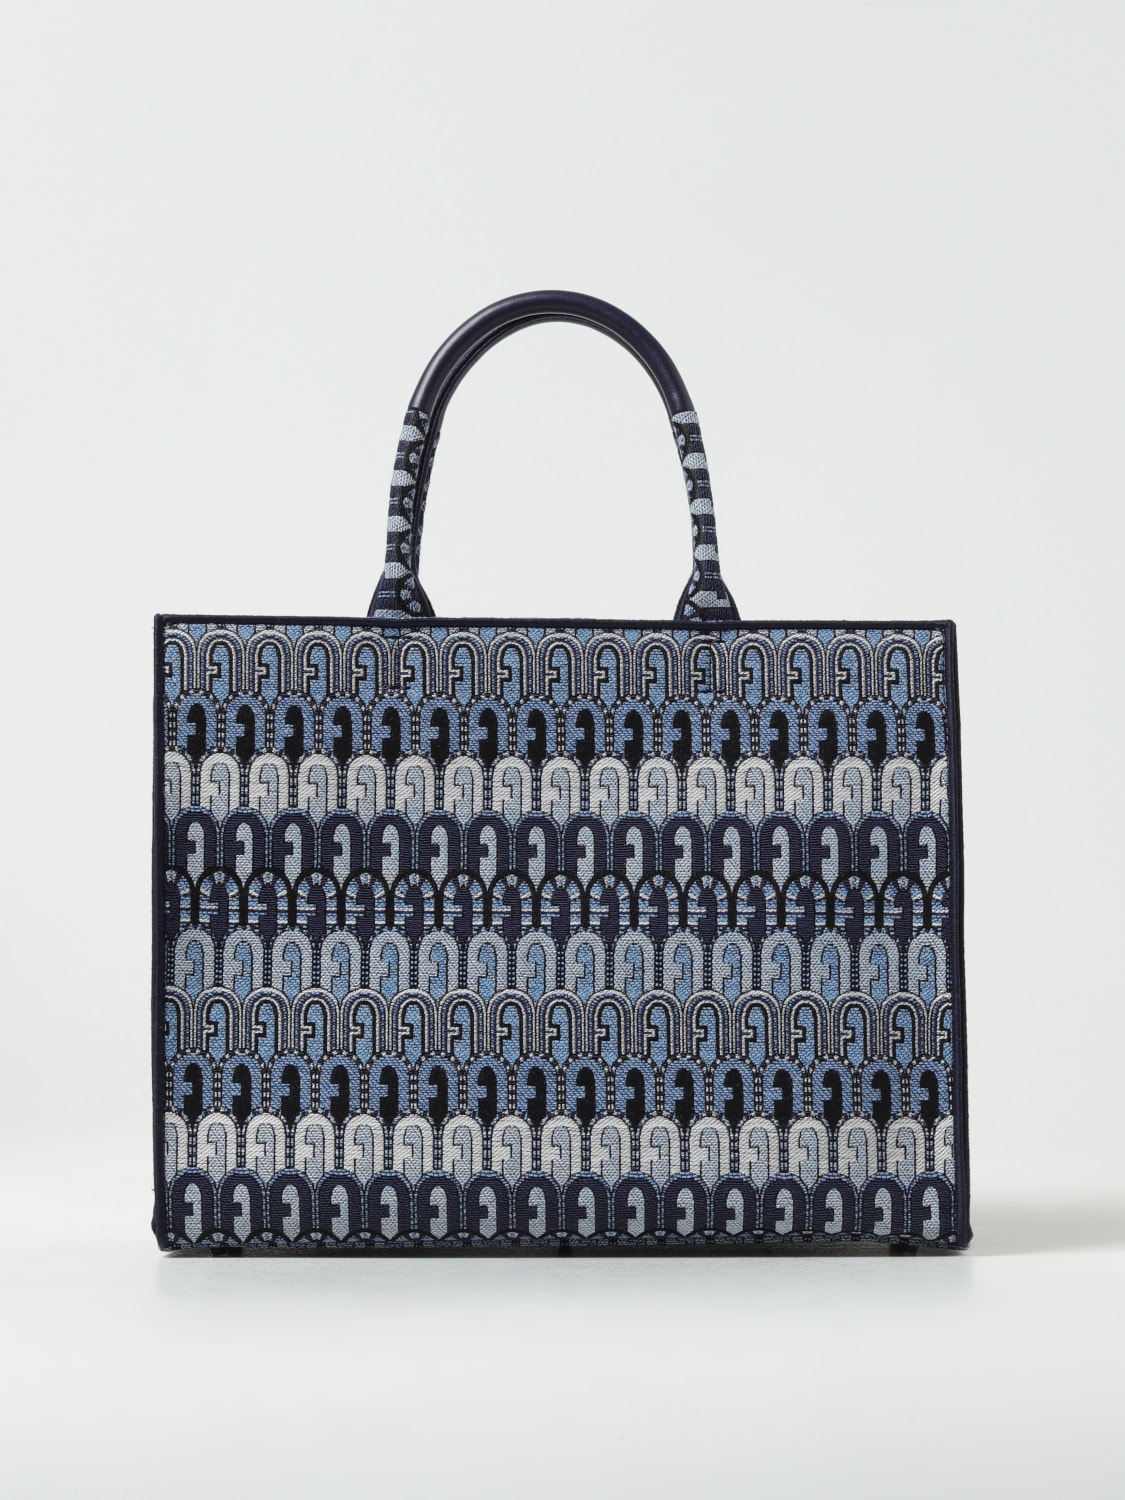 FURLA: Opportunity L bag in canvas with jacquard logo - Denim | Furla tote  bags WB00255A0459 online at GIGLIO.COM